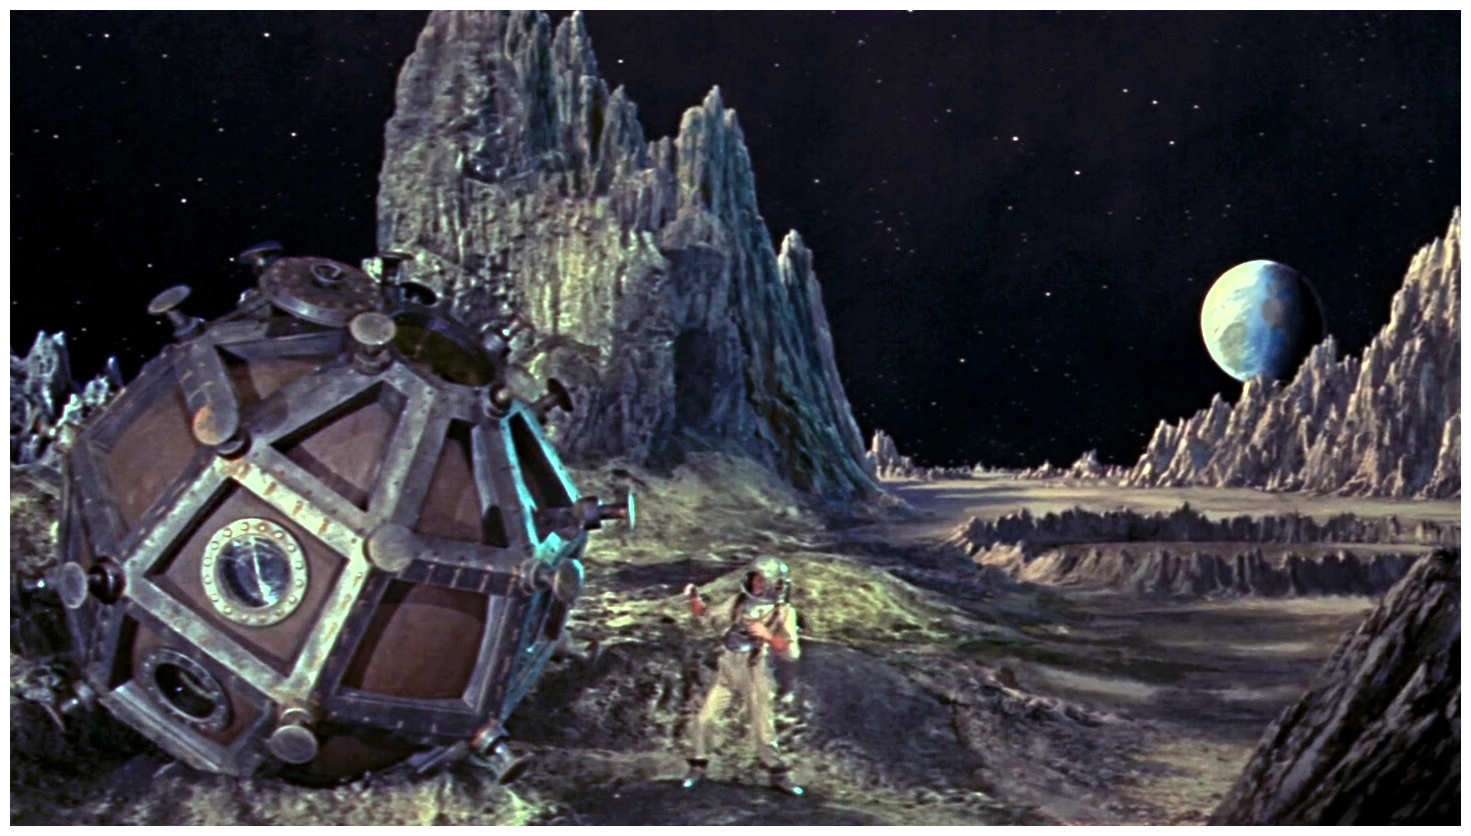 The Cavorite ship lands on The Moon in The First Men in the Moon (1964)